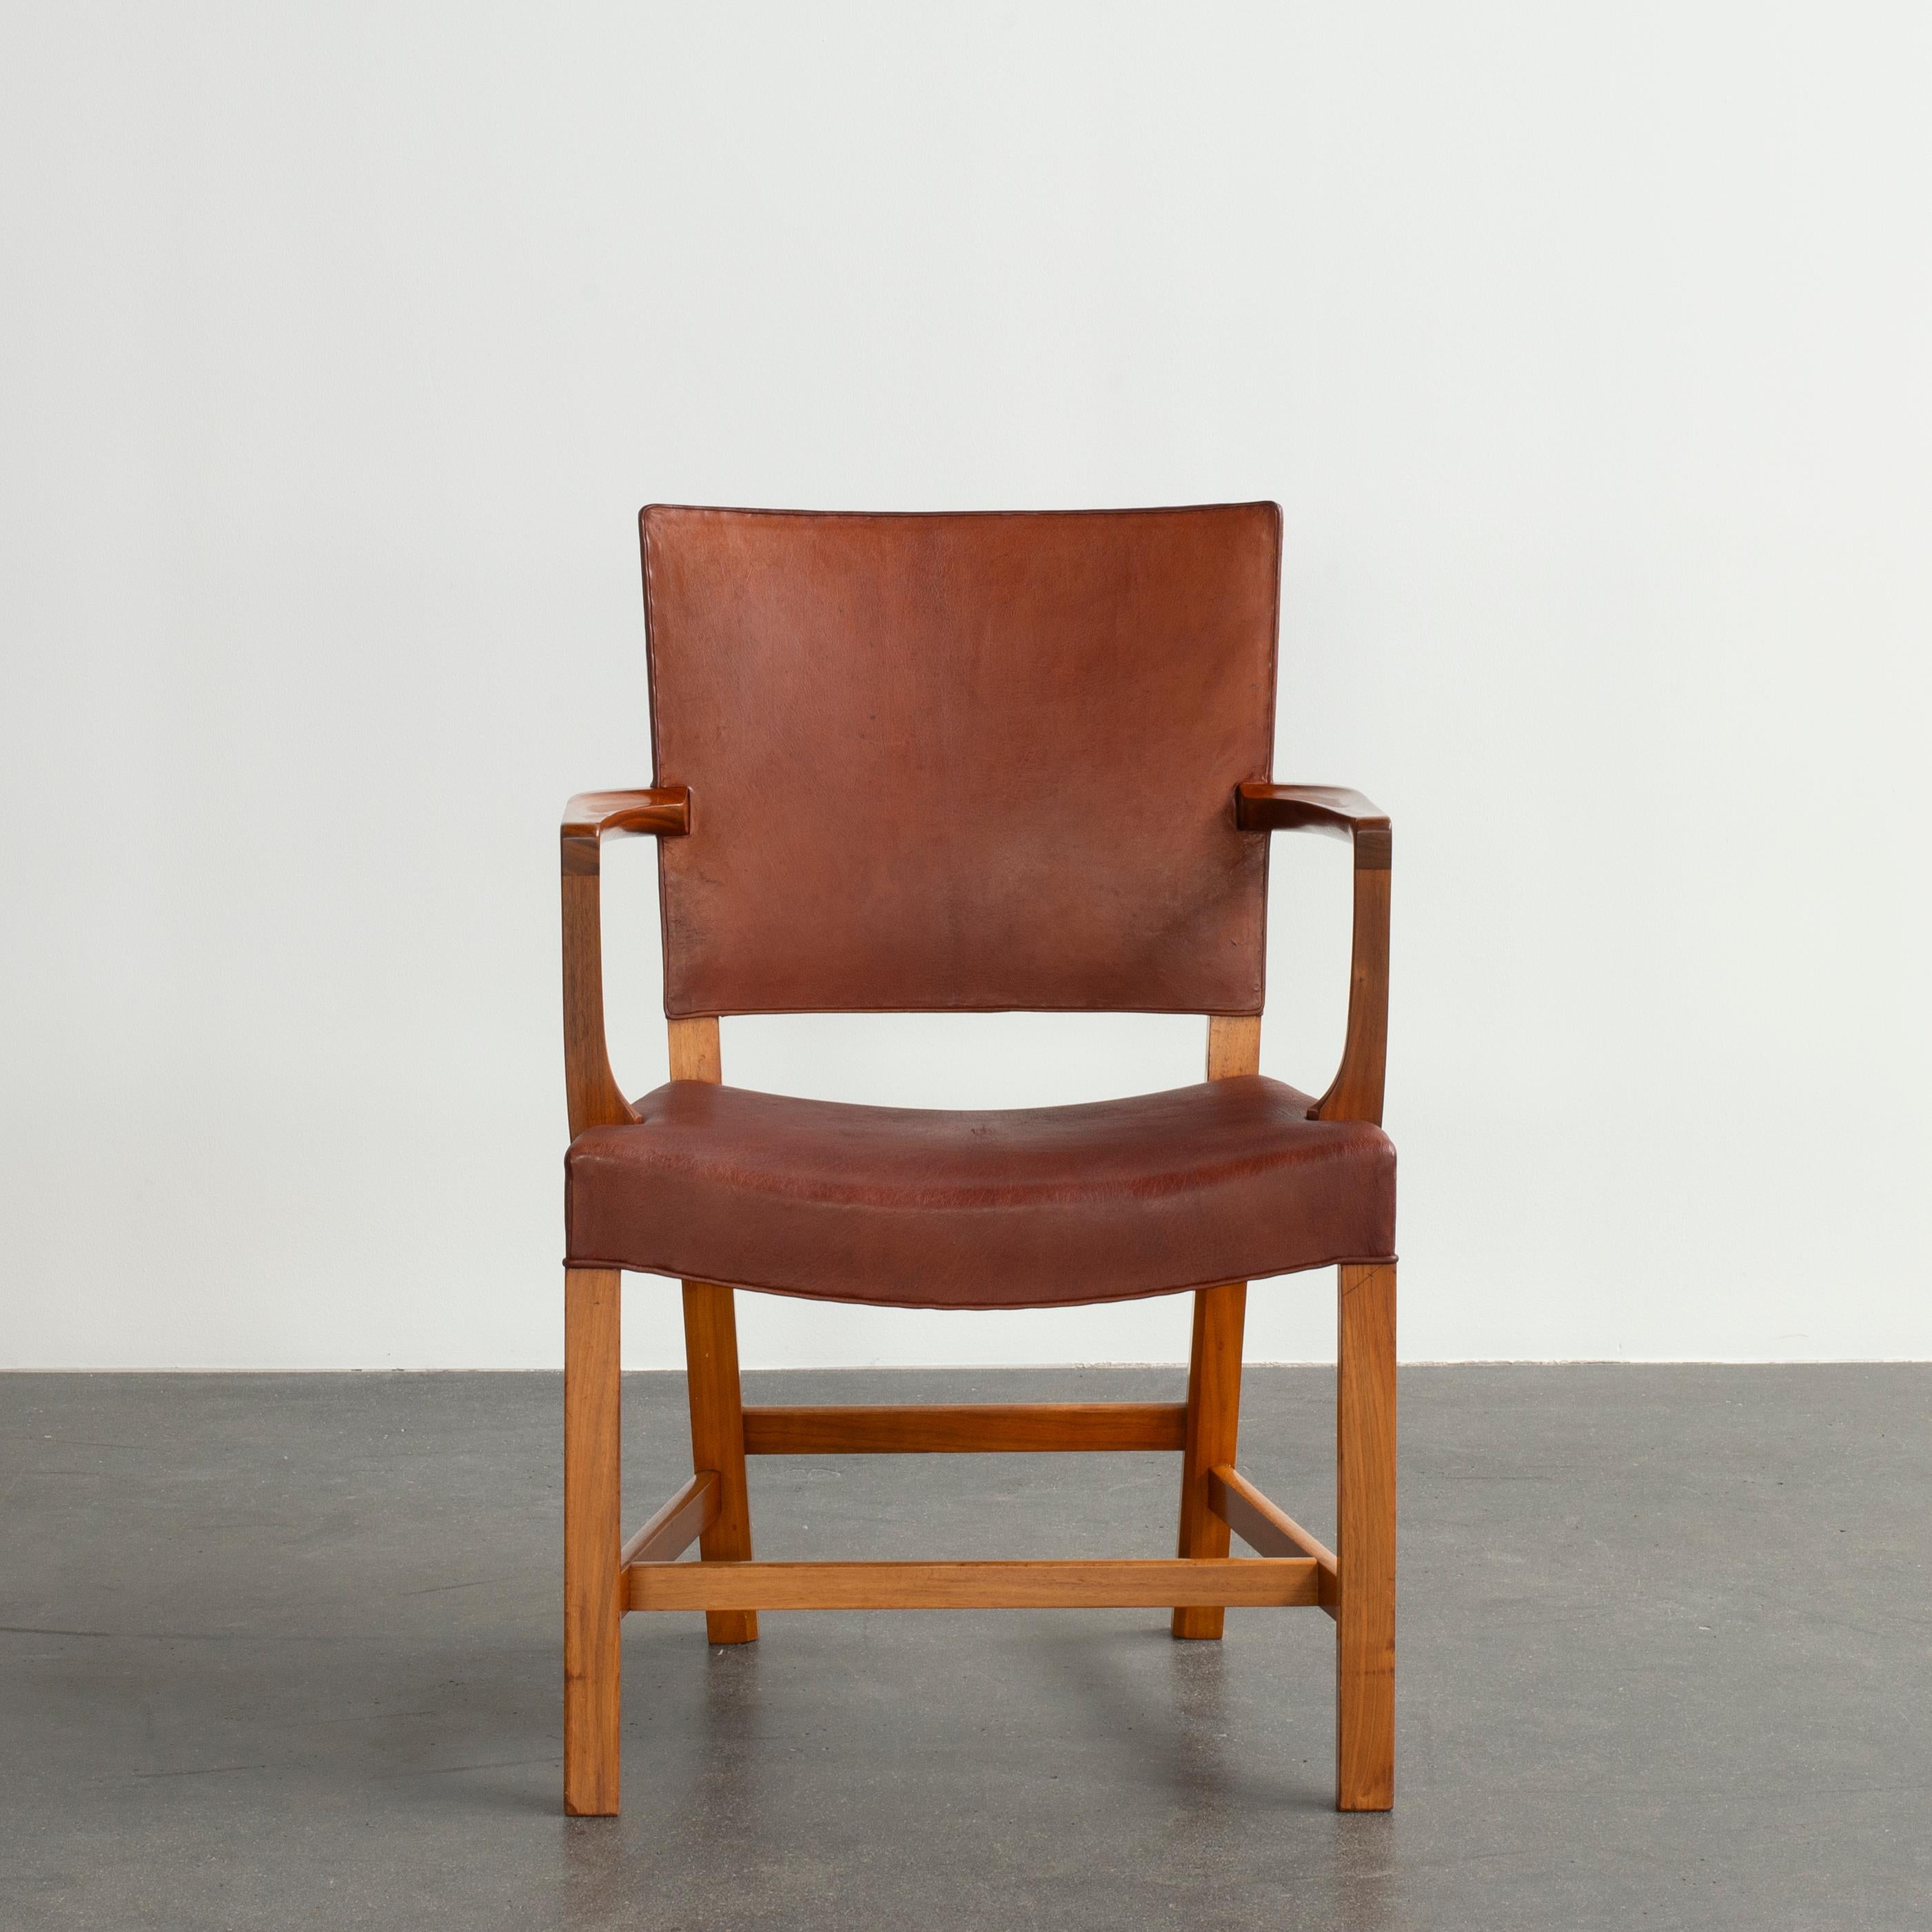 Kaare Klint 'red chair' in walnut. Upholstered with Niger leather. Executed by Rud. Rasmussen, 1934-1938.

Underside with manufacturer's paper label RUD. RASMUSSENS/SNEDKERIER/45 NØRREBROGAD/KØBENHAVN, pencilled serial number and architect's